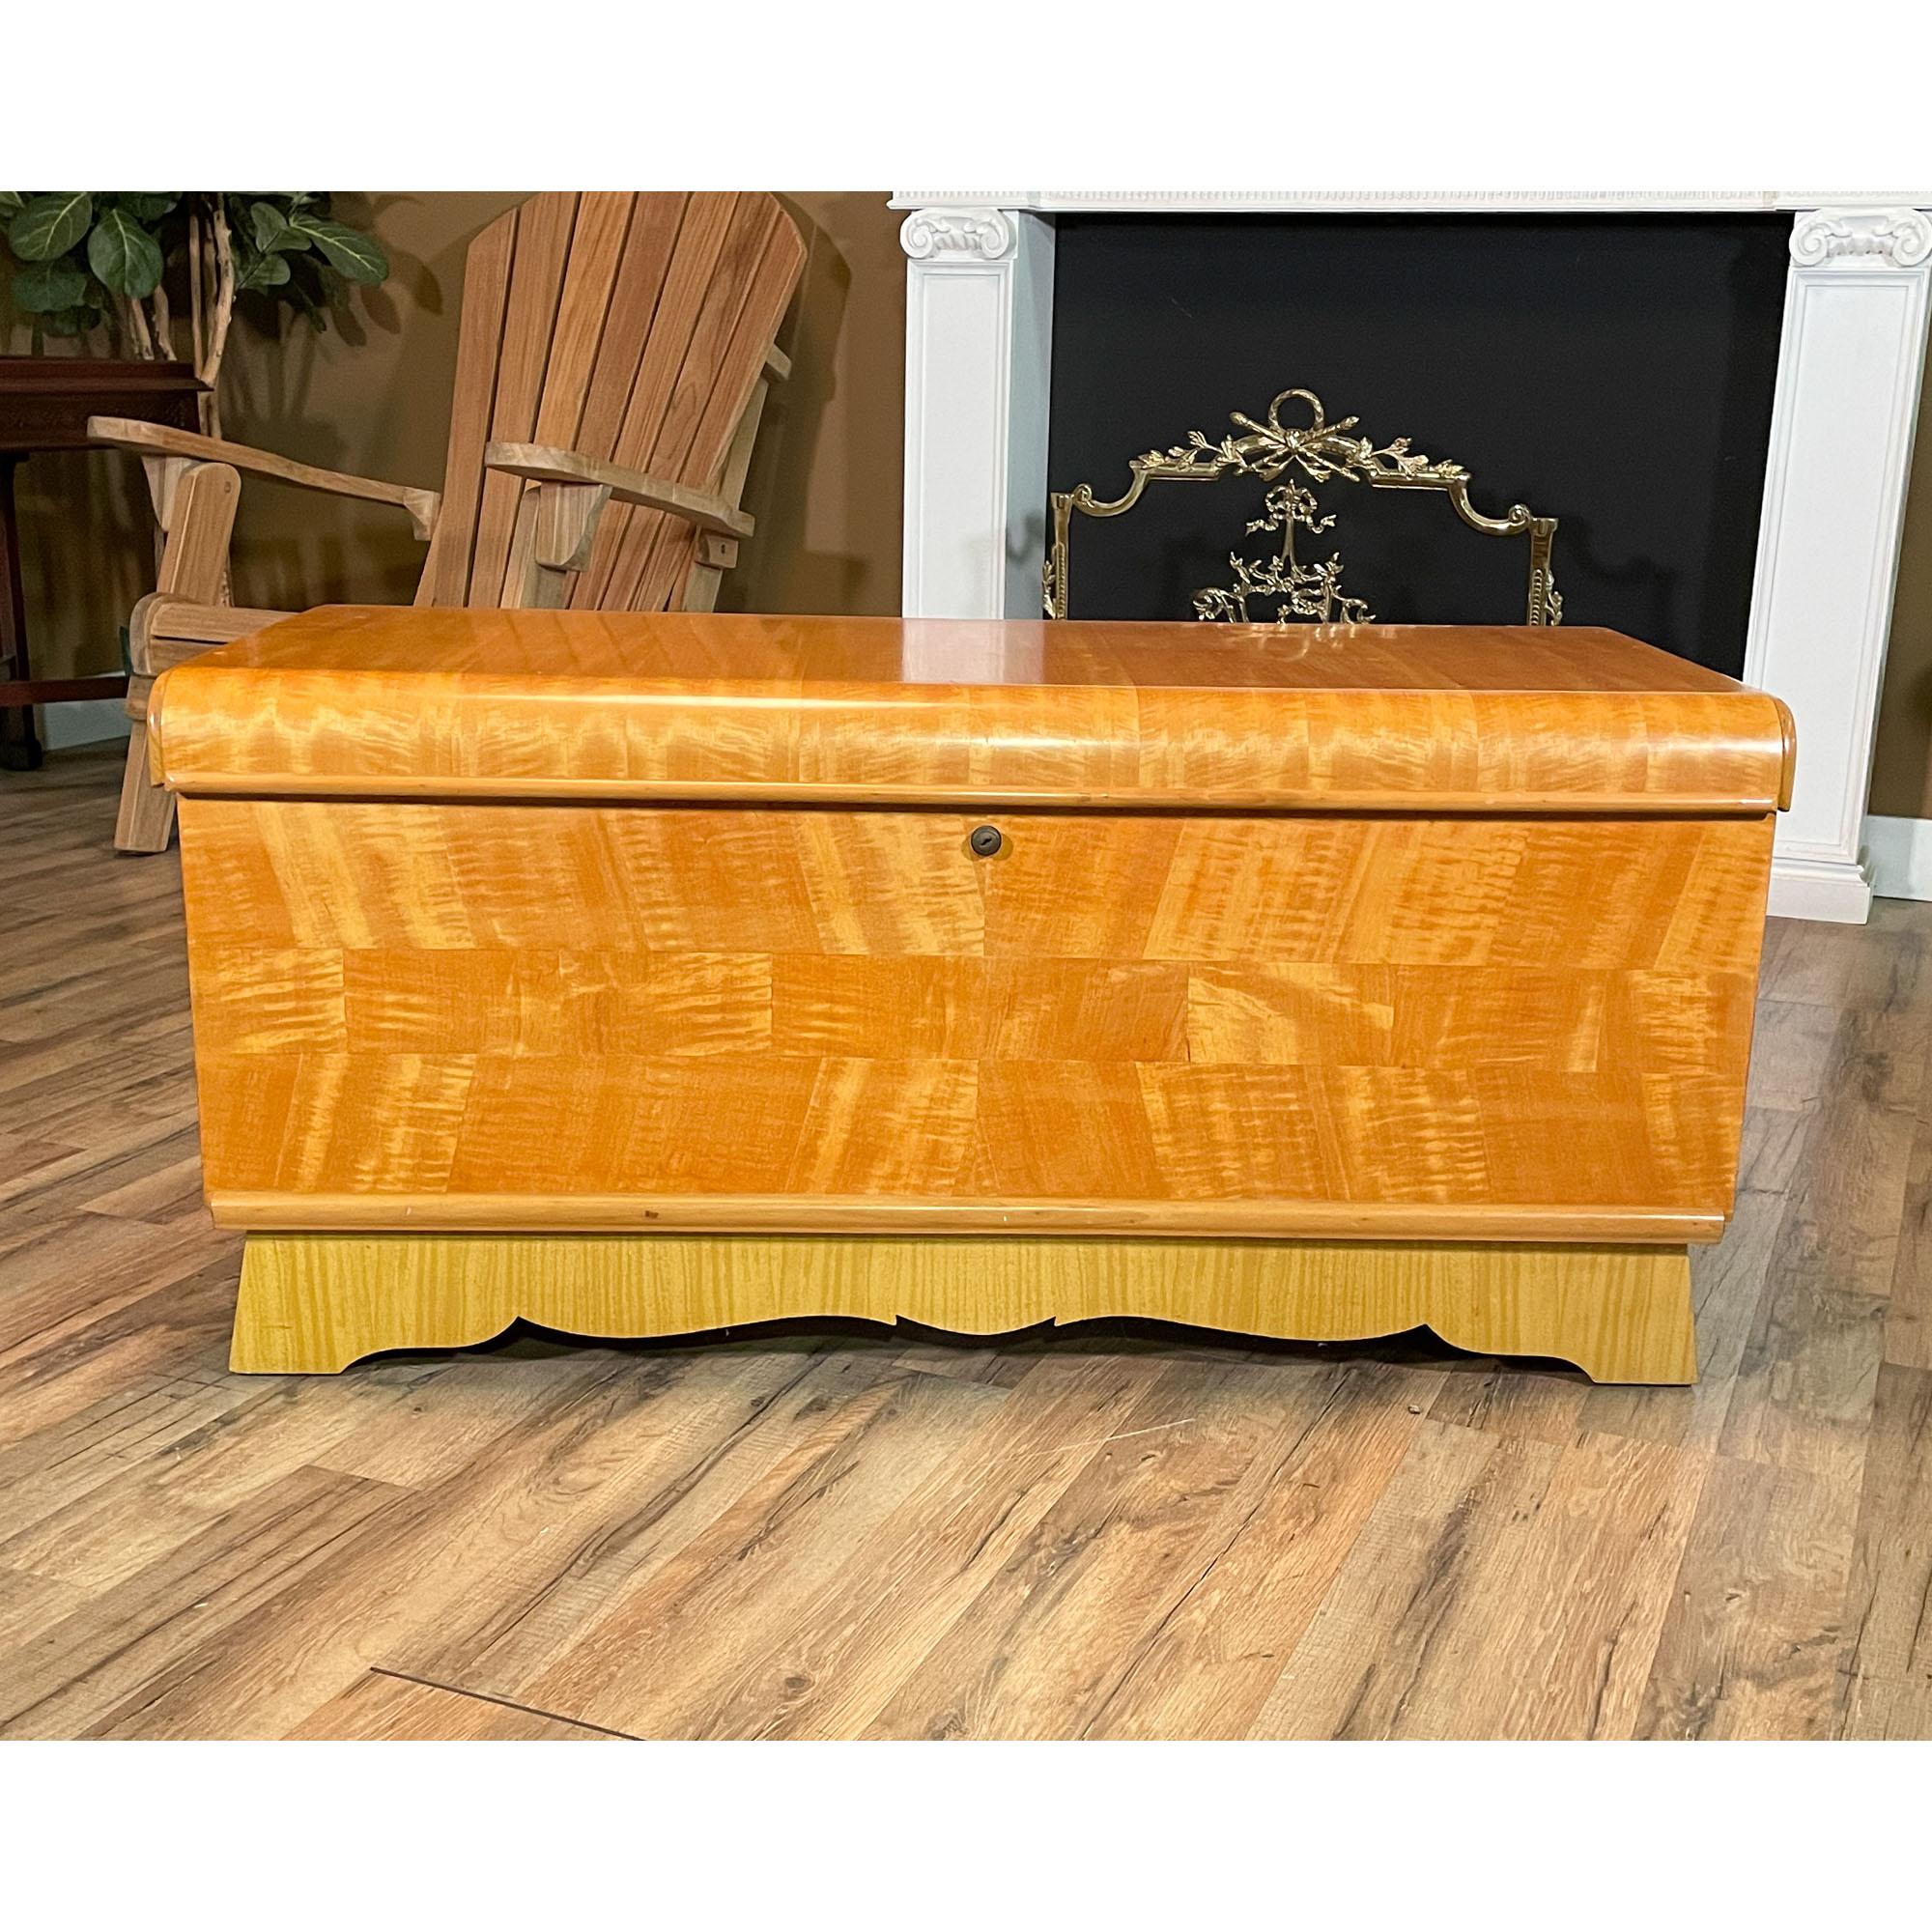 A Vintage Satinwood Blanket Chest brought to you by Niagara Furniture. This stylish piece has fantastic details throughout; all in original untouched condition. The case has been created using the finest satinwood covering the cedar lined interior